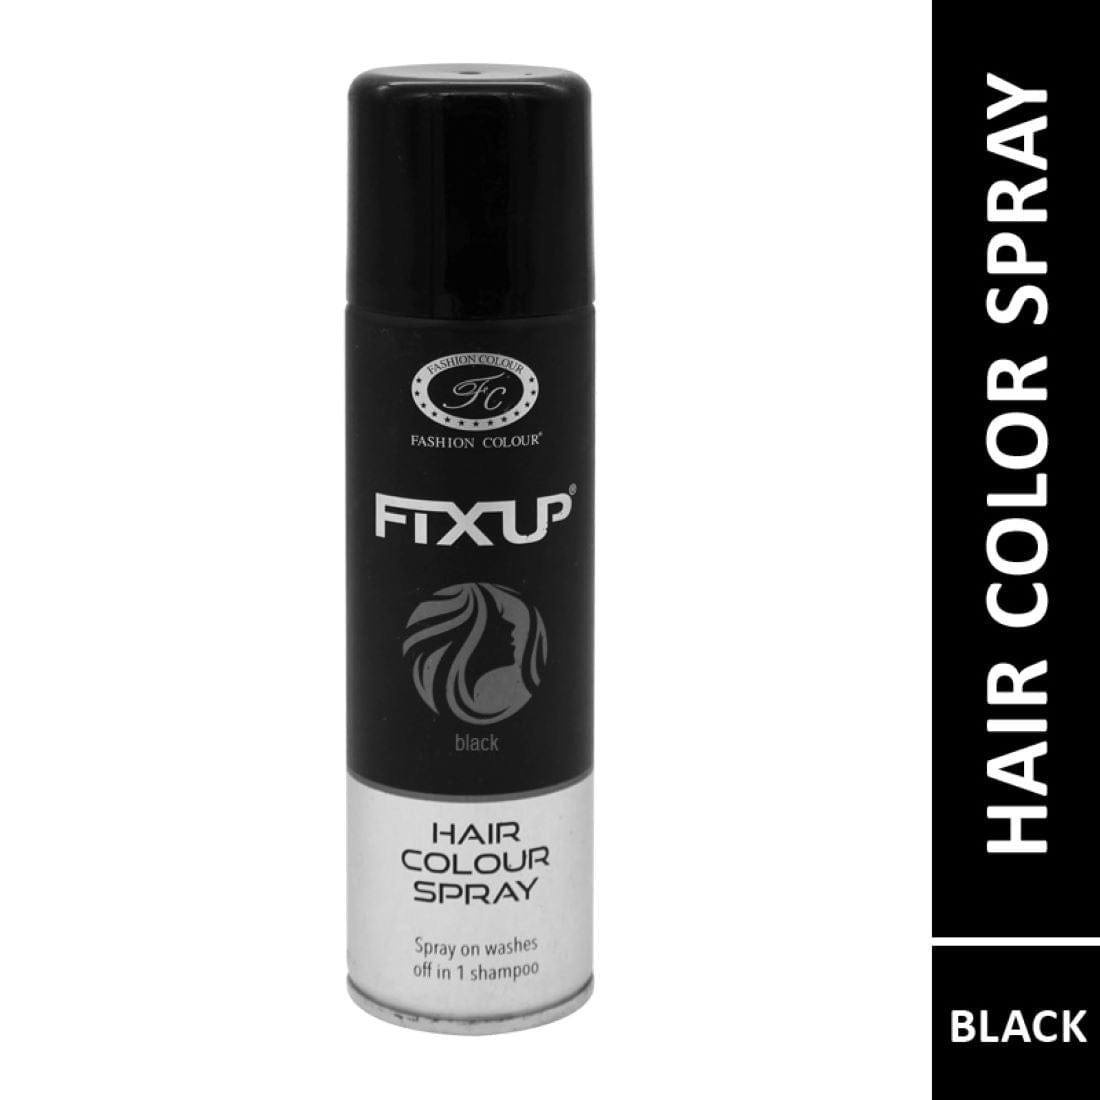 Fixup Hair Colour Spray I Available in Multi Colour Shades to Set Your –  FASHION COLOUR